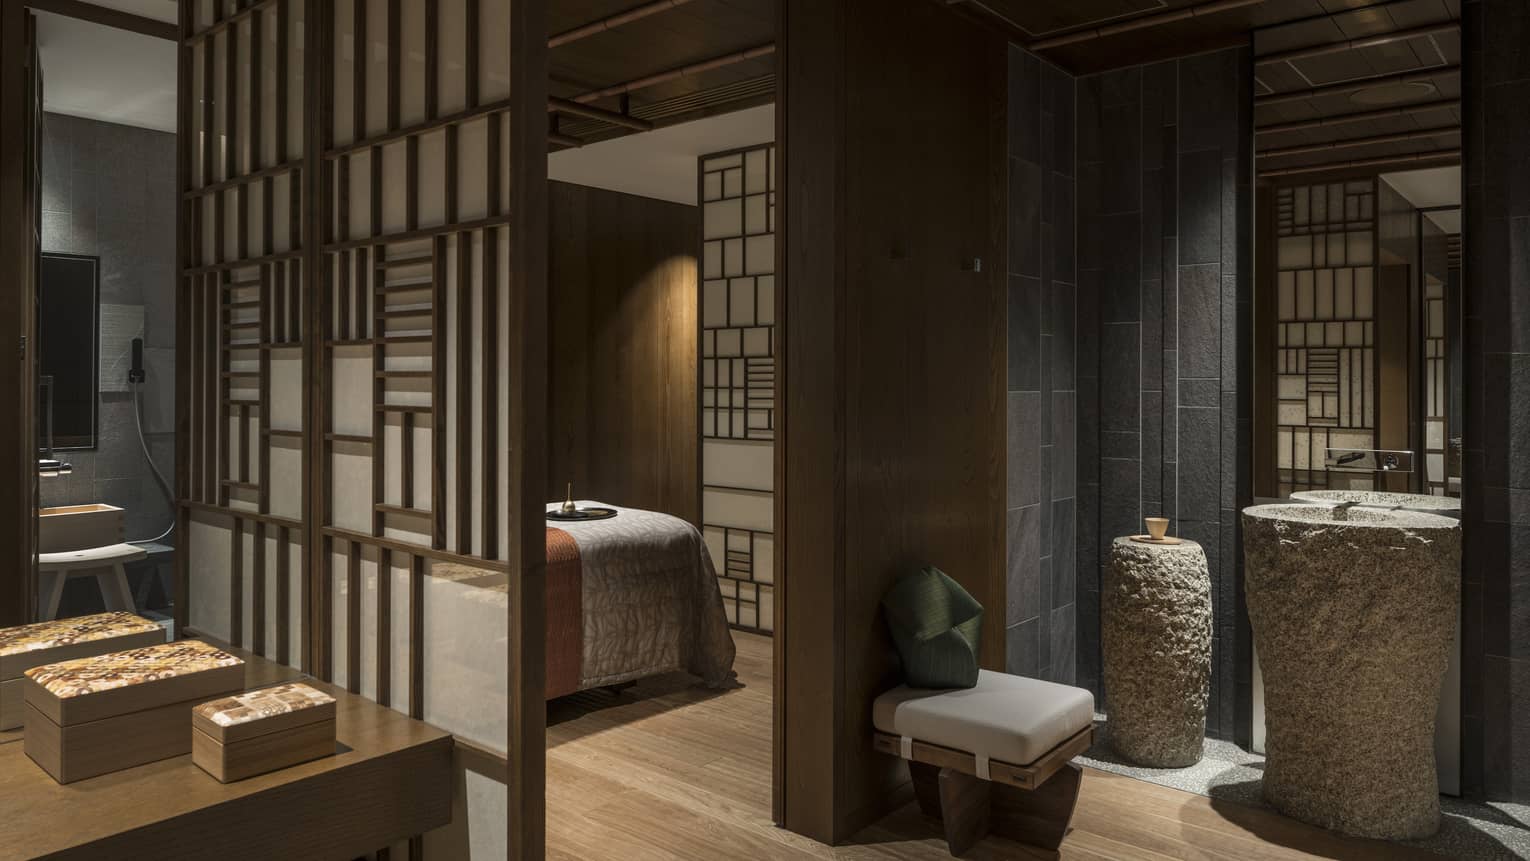 Spa treatment rooms behind screens, large stone vases